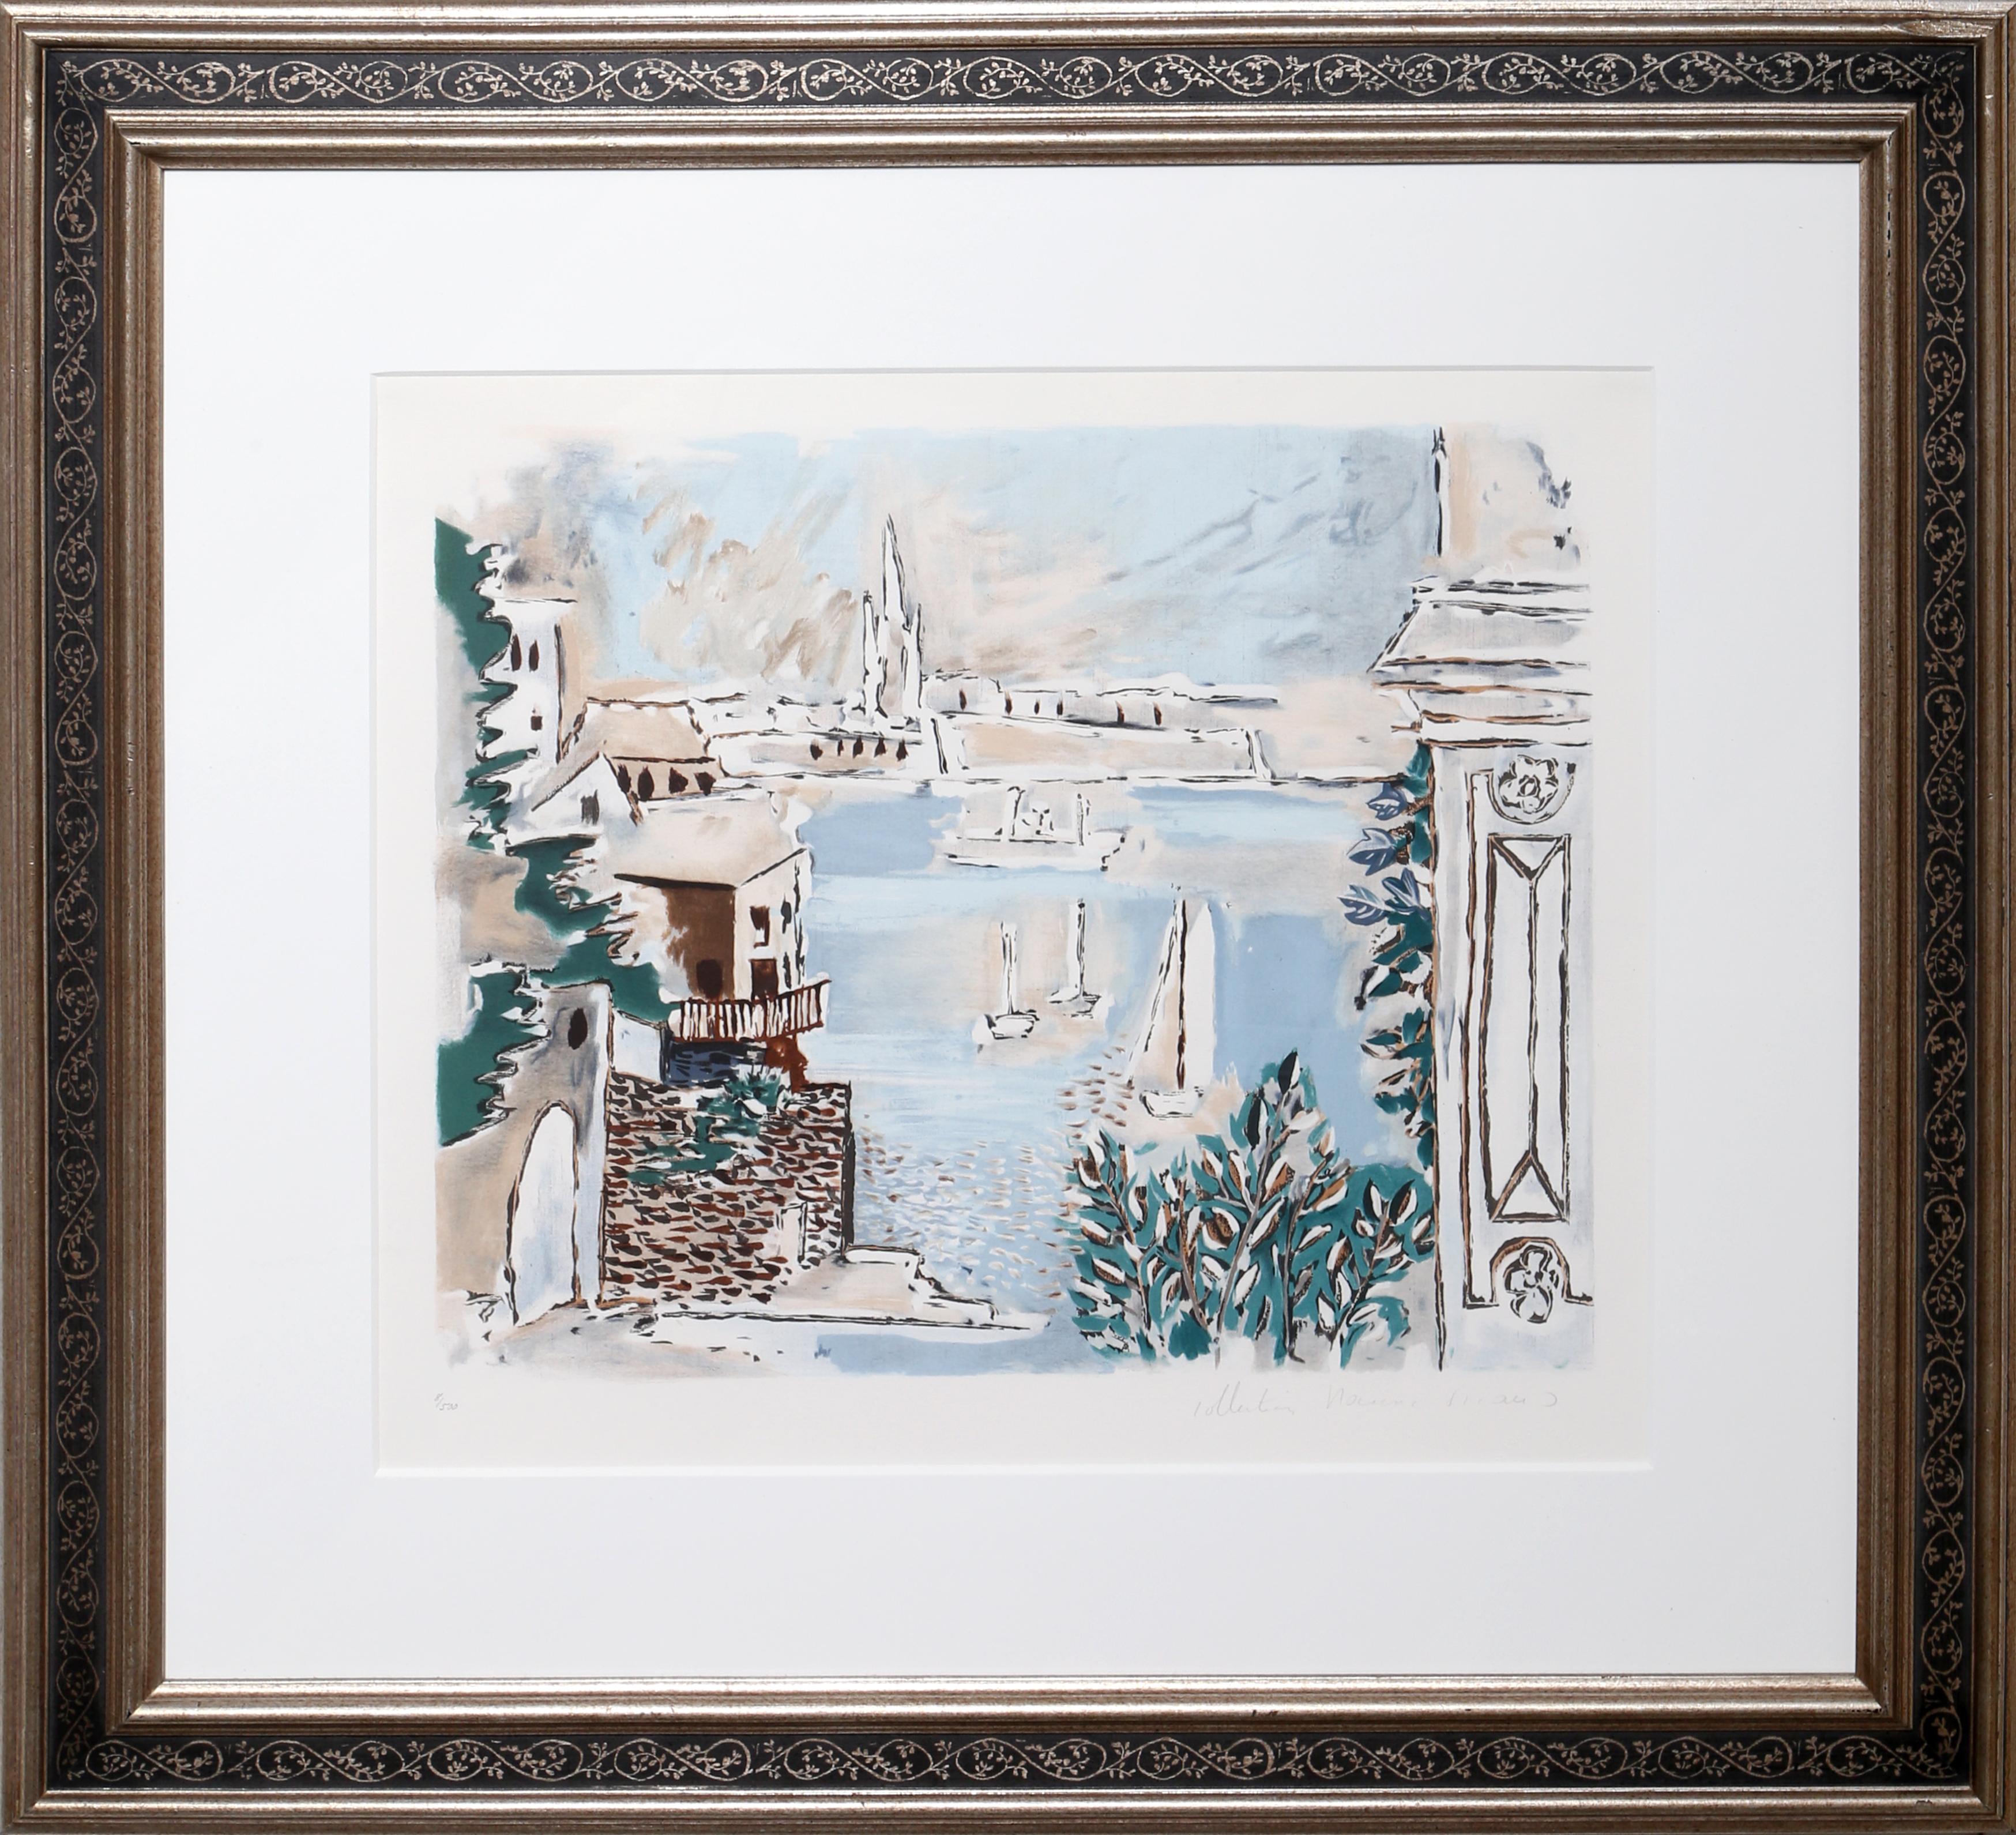 A lithograph from the Marina Picasso Estate Collection after the Pablo Picasso painting "Paysage de Dinard". The original painting was completed in 1922. In the 1970's after Picasso's death, Marina Picasso, his granddaughter, authorized the creation